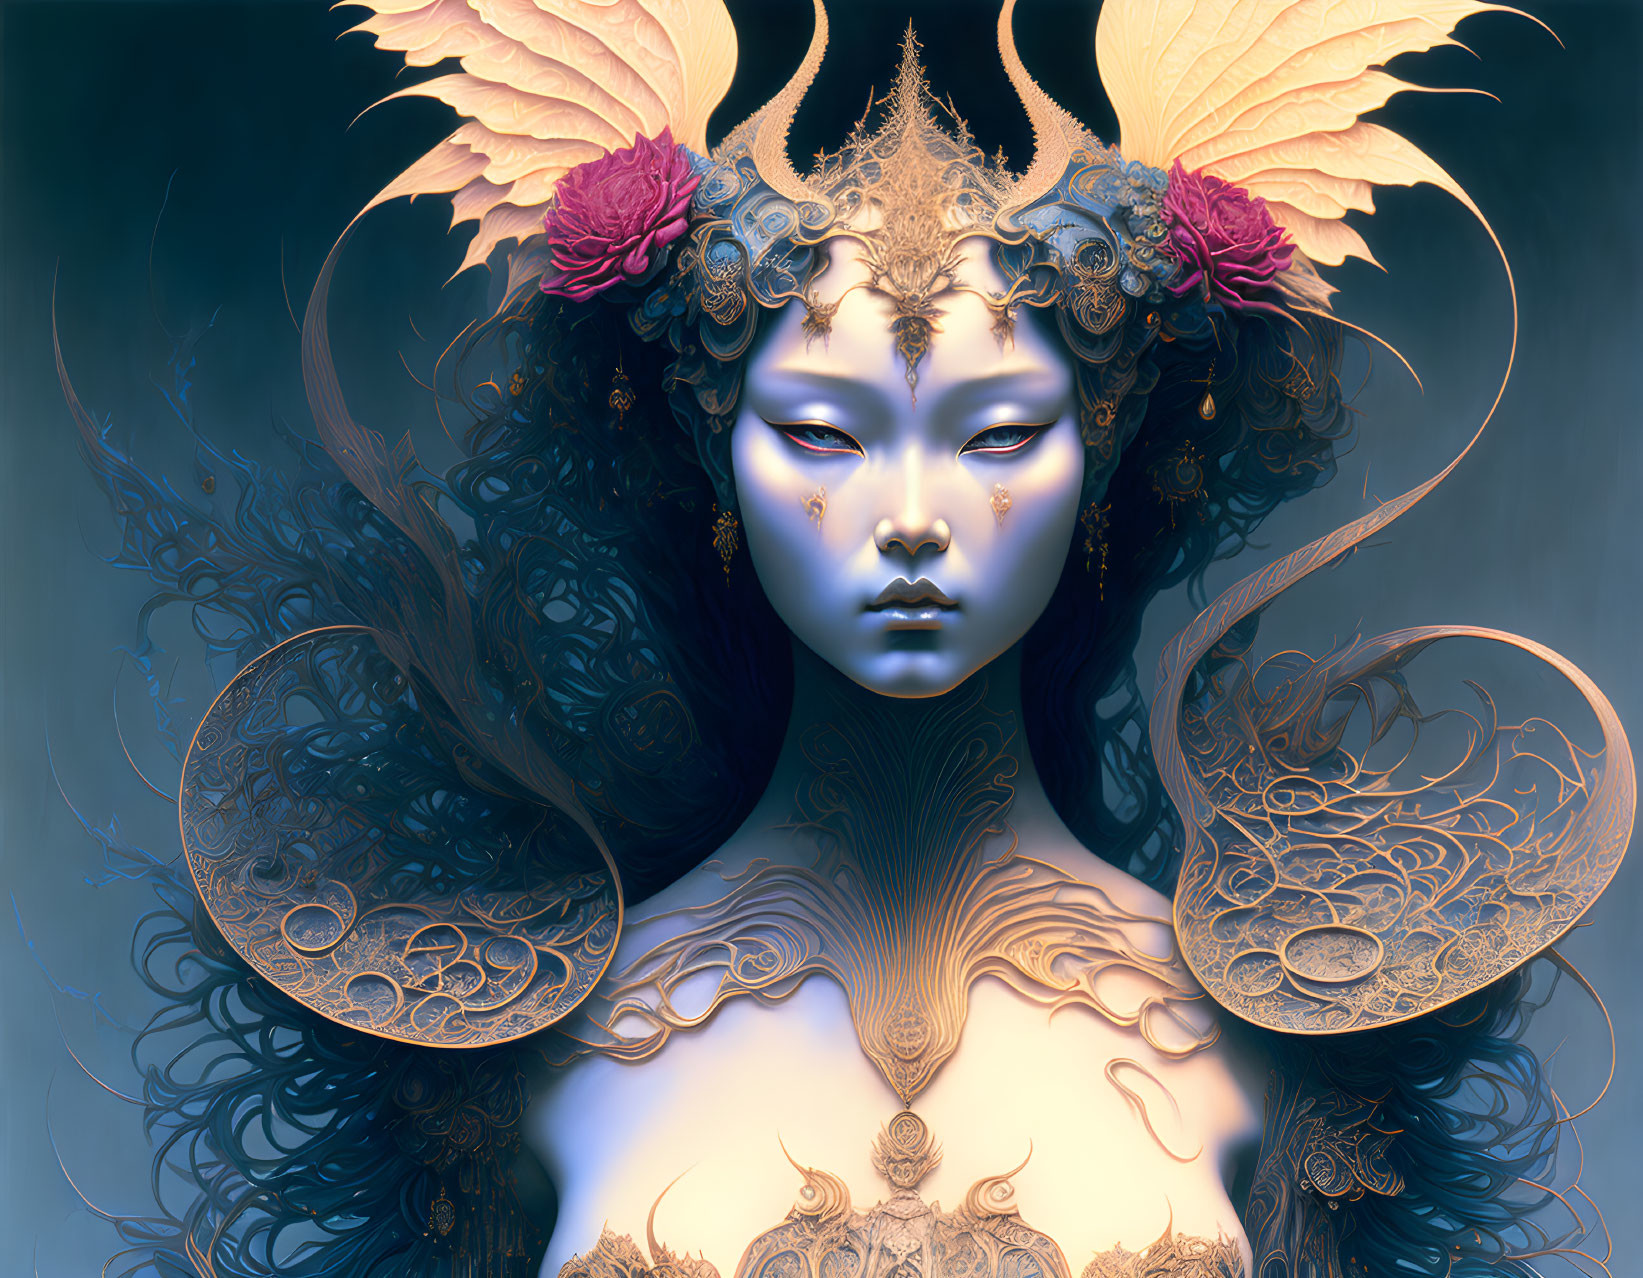 Blue-skinned figure with golden headdress and mystical aura.